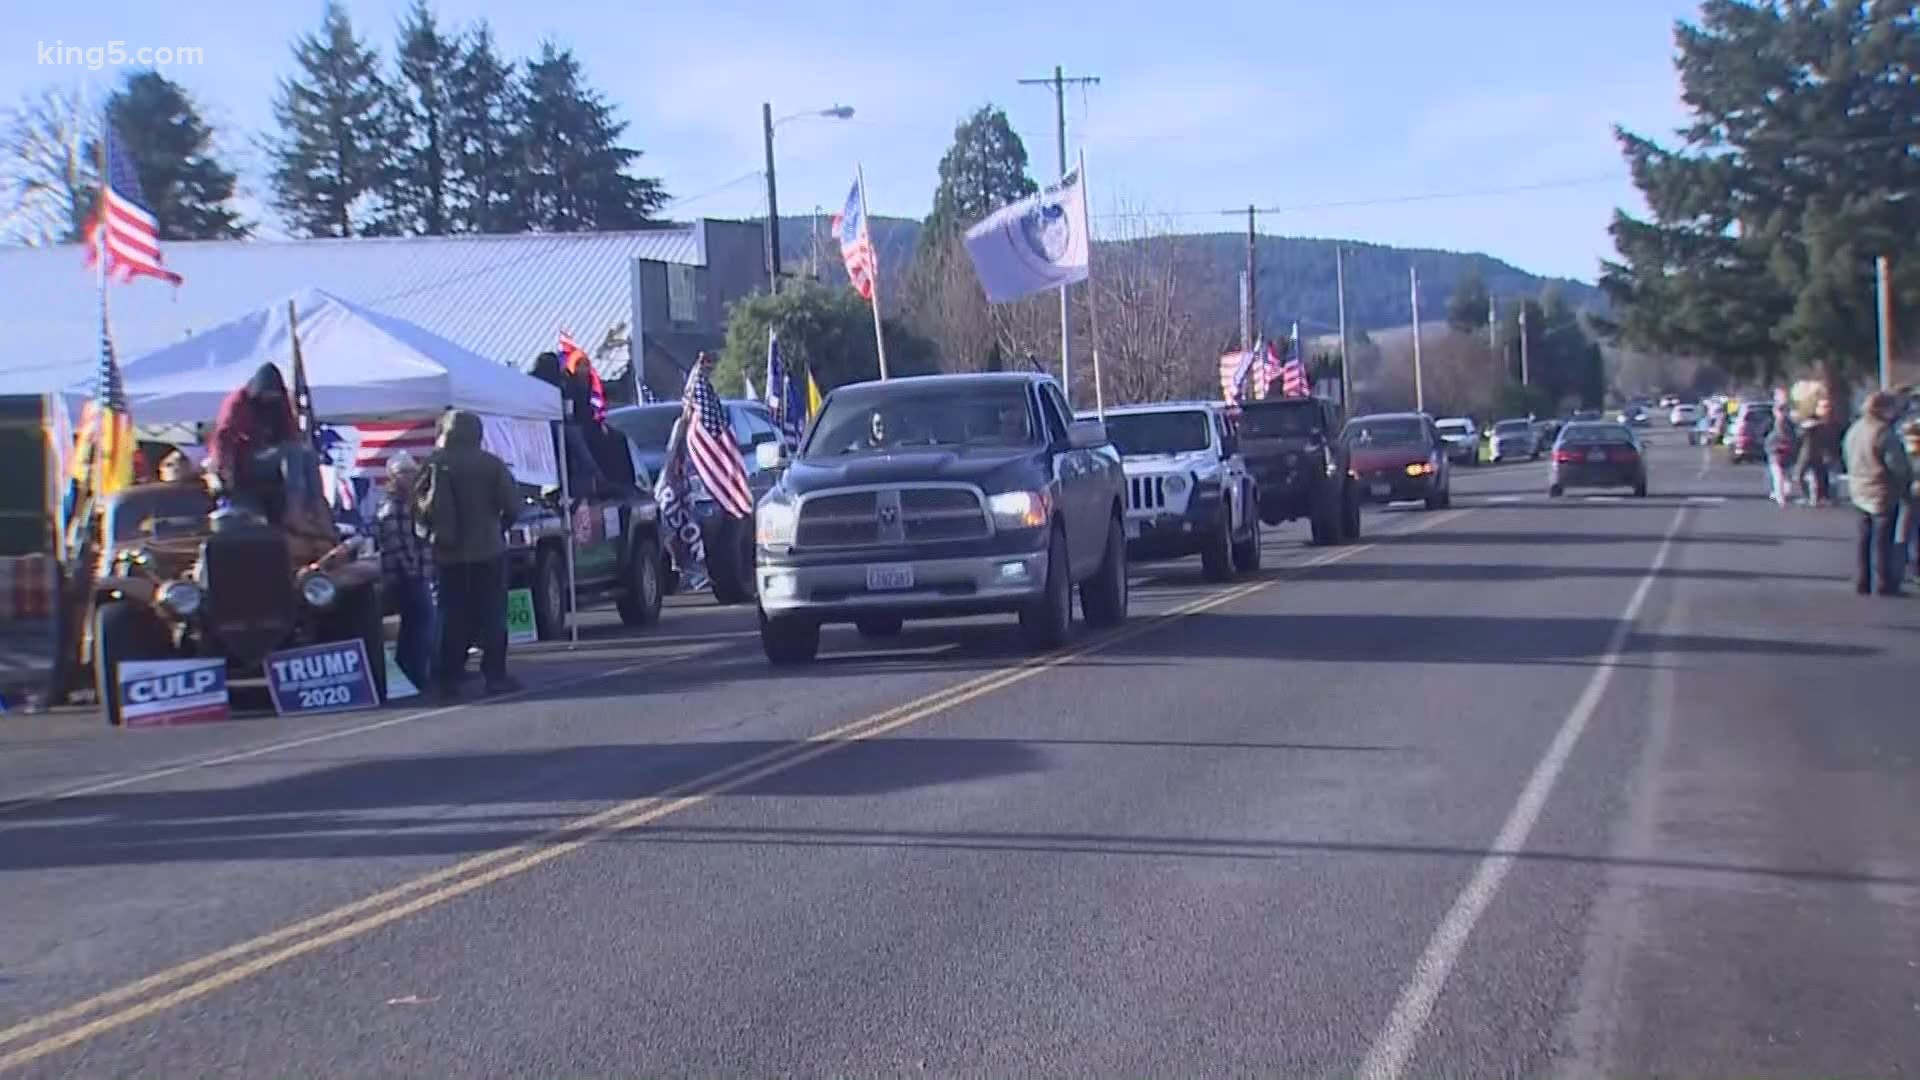 Residents and business owners in the small town of Mossyrock are getting fed up with COVID-19 restrictions. A rally on Saturday brought hundreds of people.